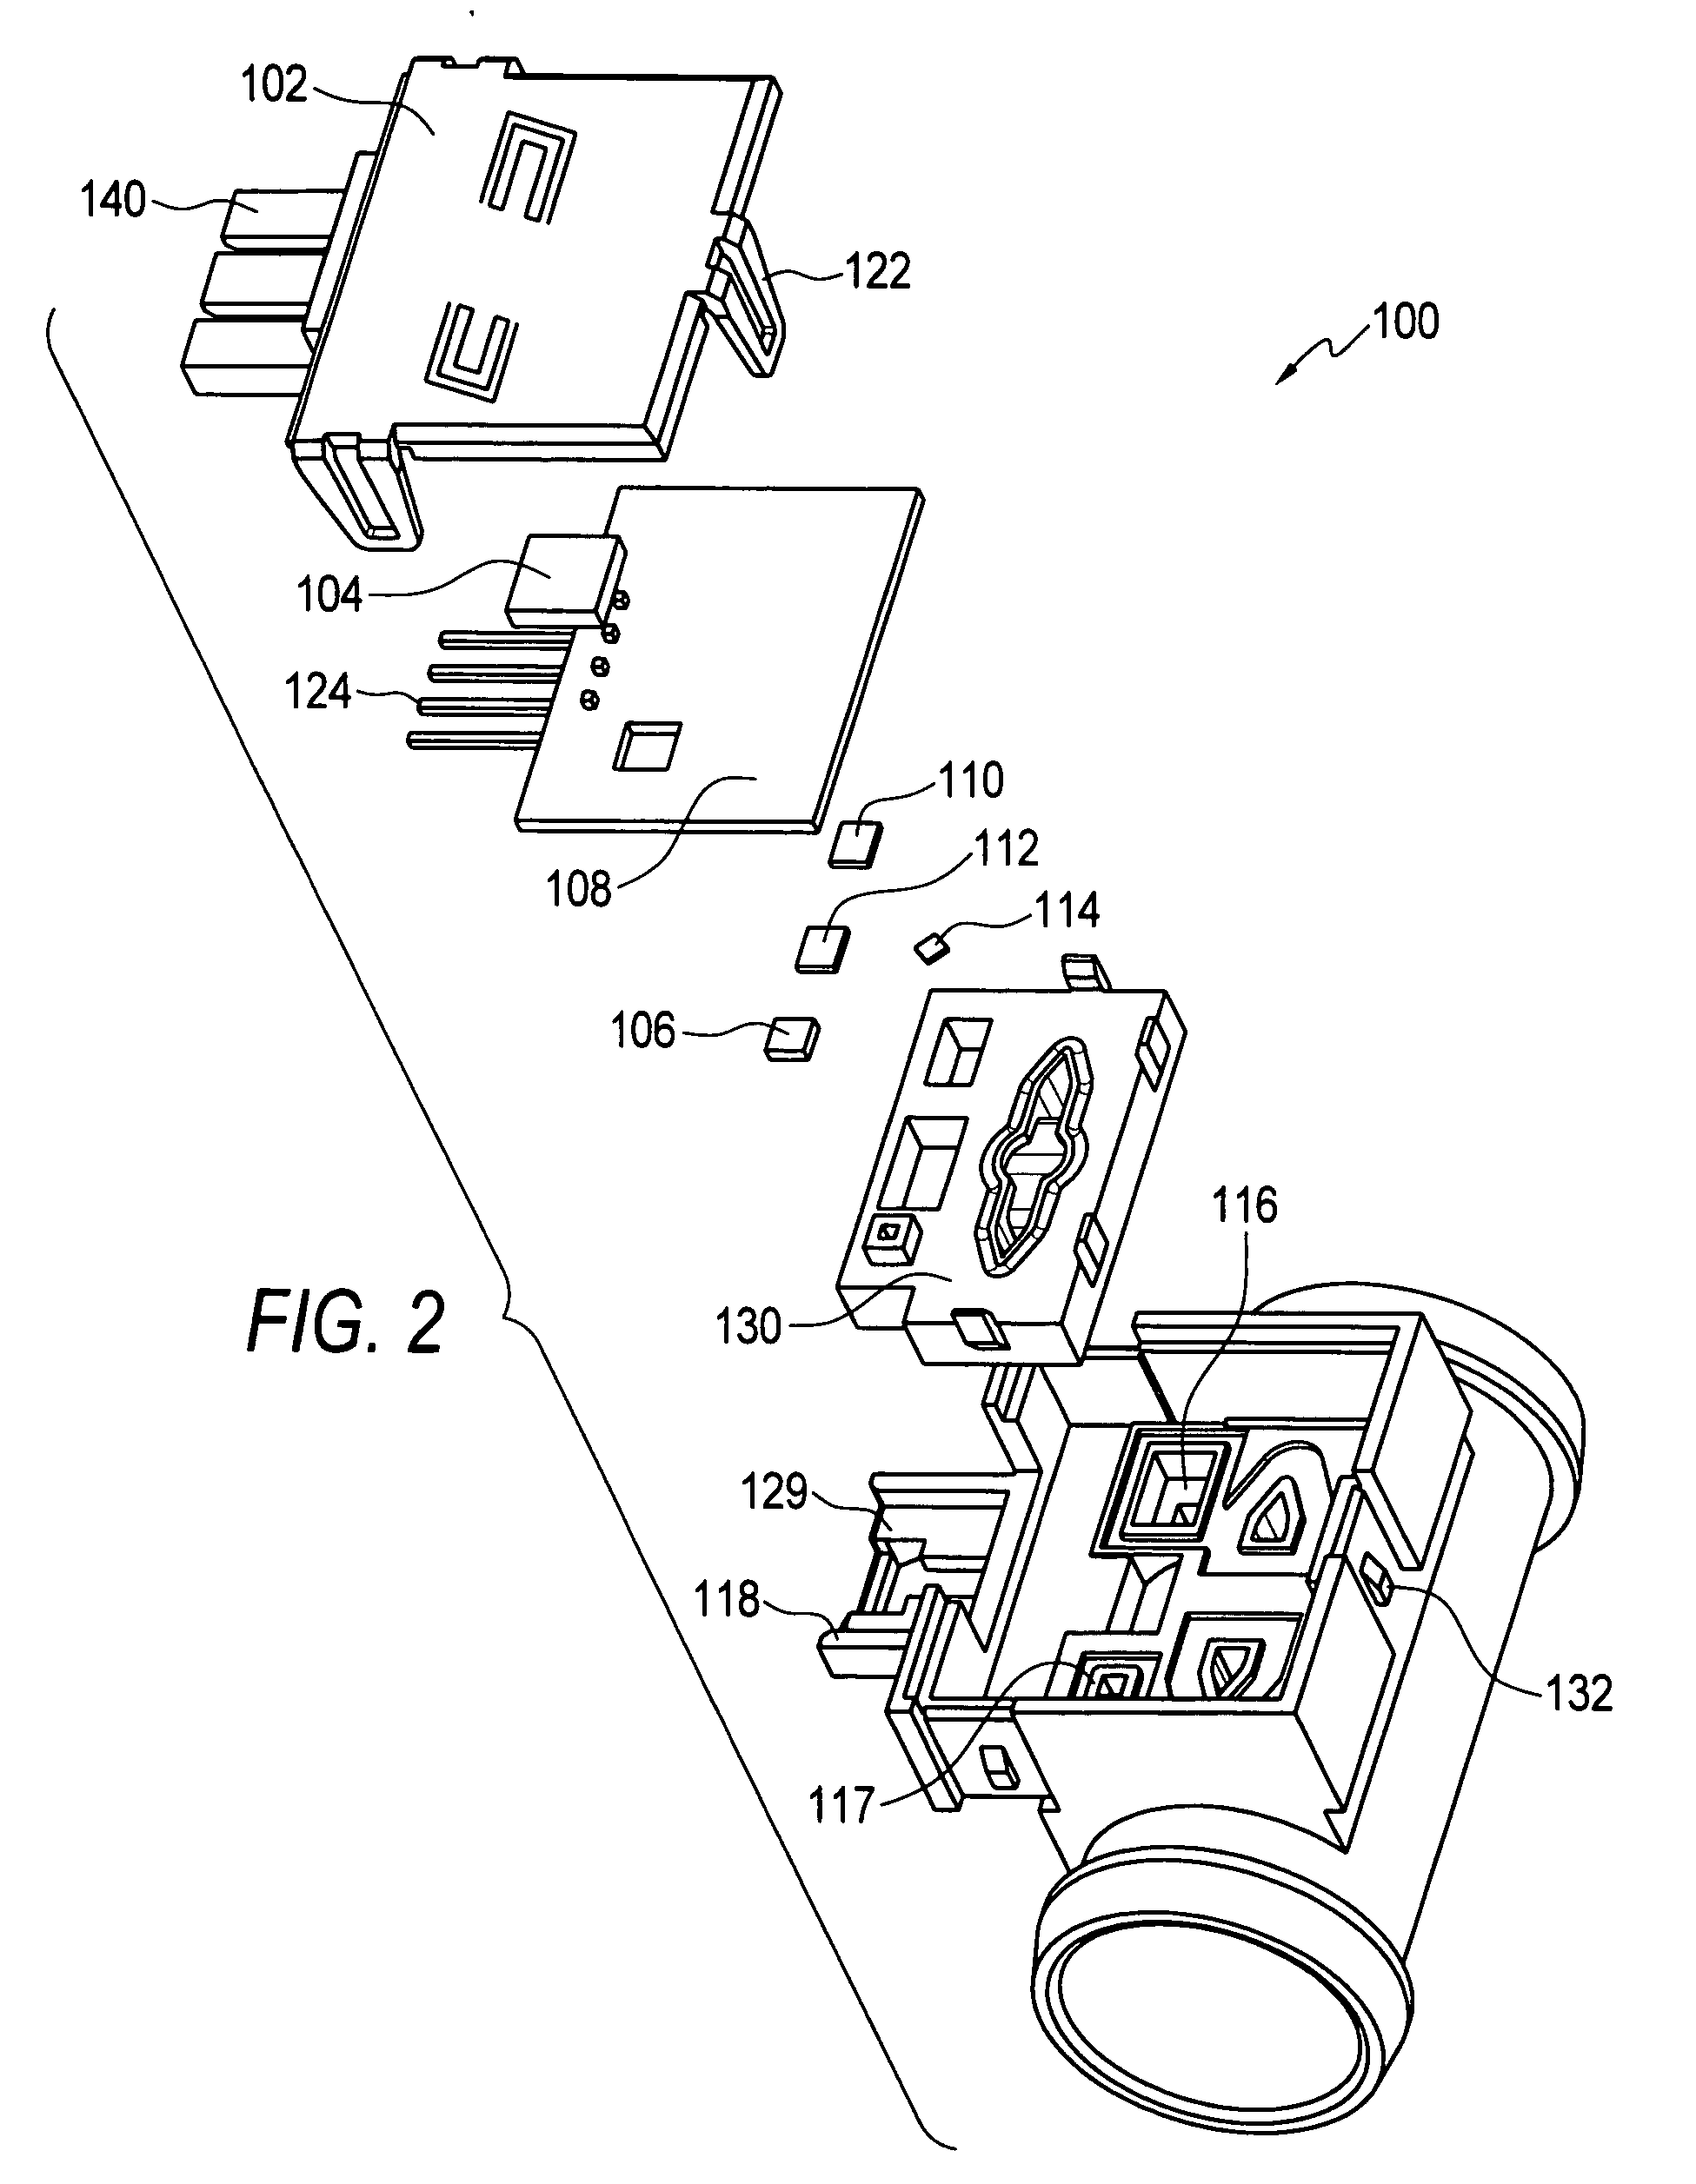 Packaging methods and systems for measuring multiple measurands including bi-directional flow